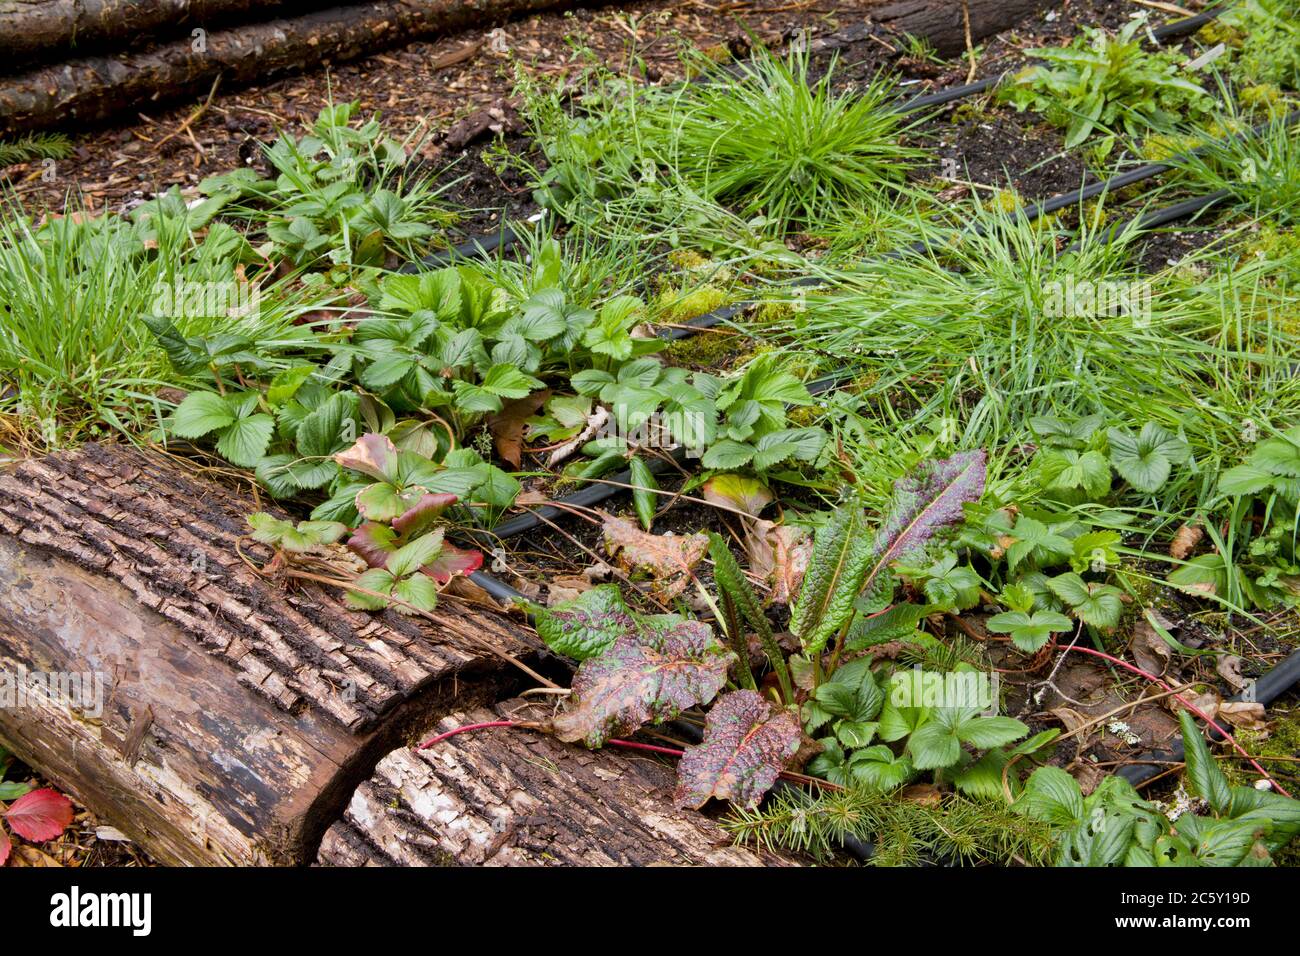 Weeds (bluegrass, curly dock, clover, dandelions, etc.) growing in a strawberry raised bed garden in Issaquah, Washington, USA Stock Photo